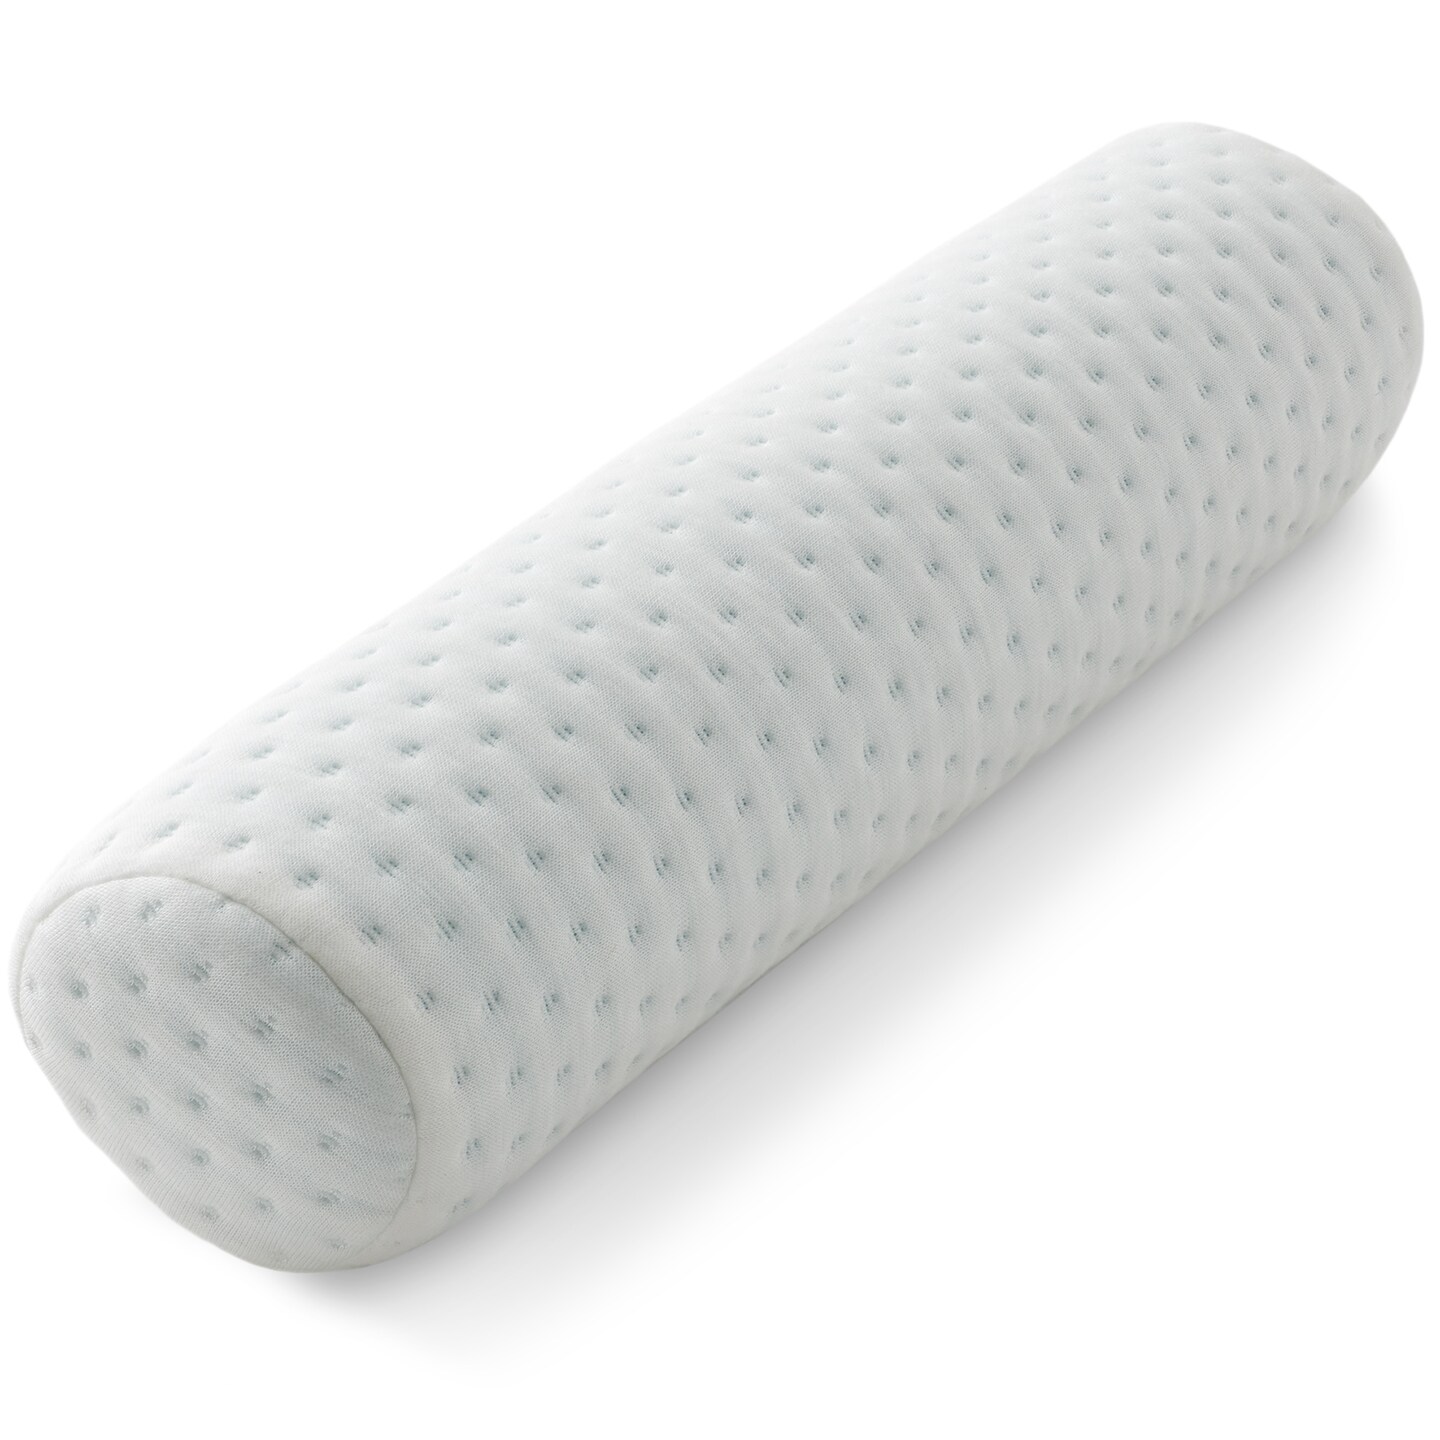 Made Medical Memory Foam Pillow, Support for Neck, Legs, Back and Spine During Sleep